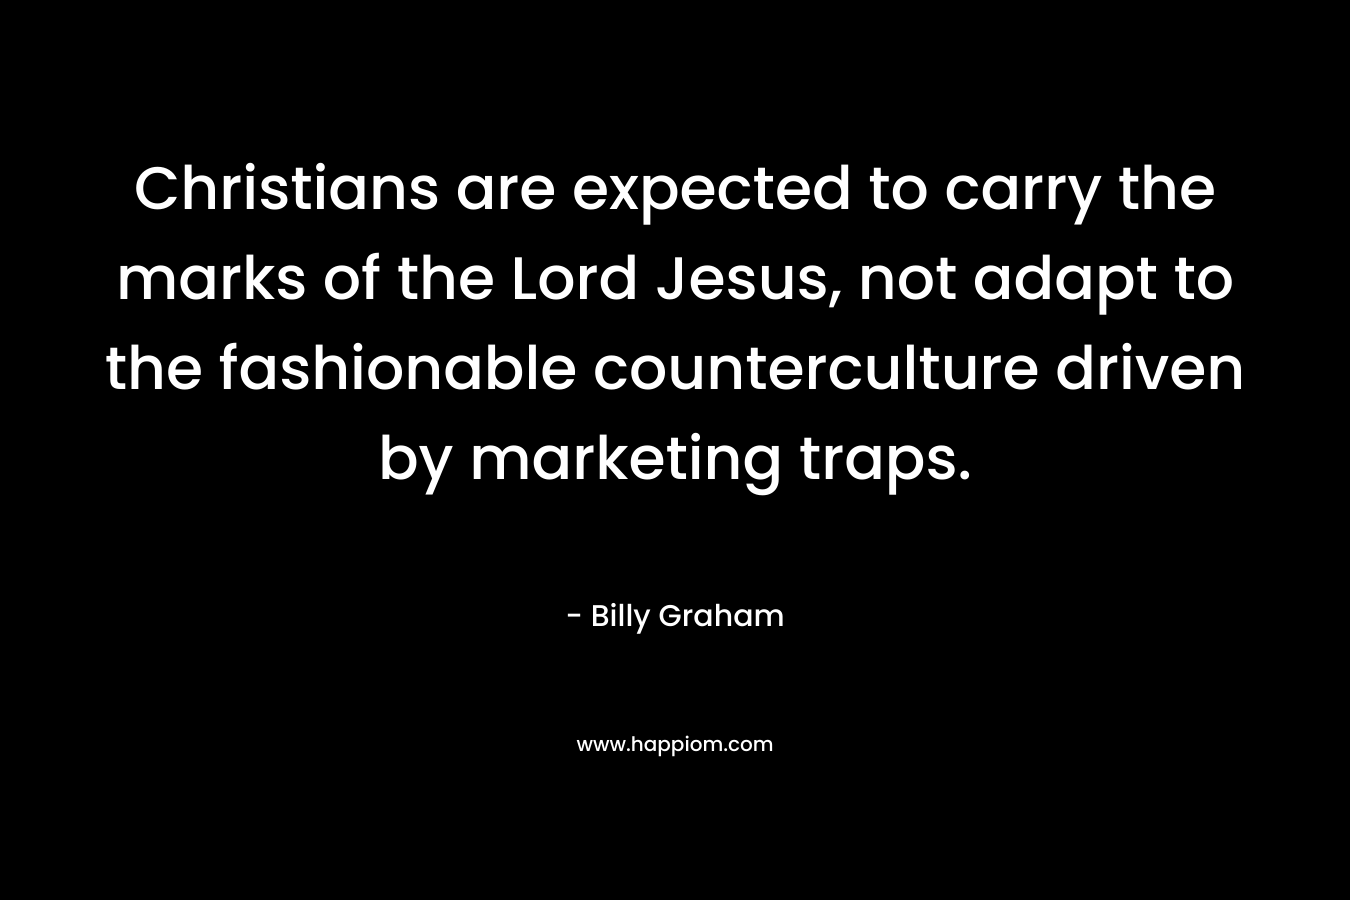 Christians are expected to carry the marks of the Lord Jesus, not adapt to the fashionable counterculture driven by marketing traps.